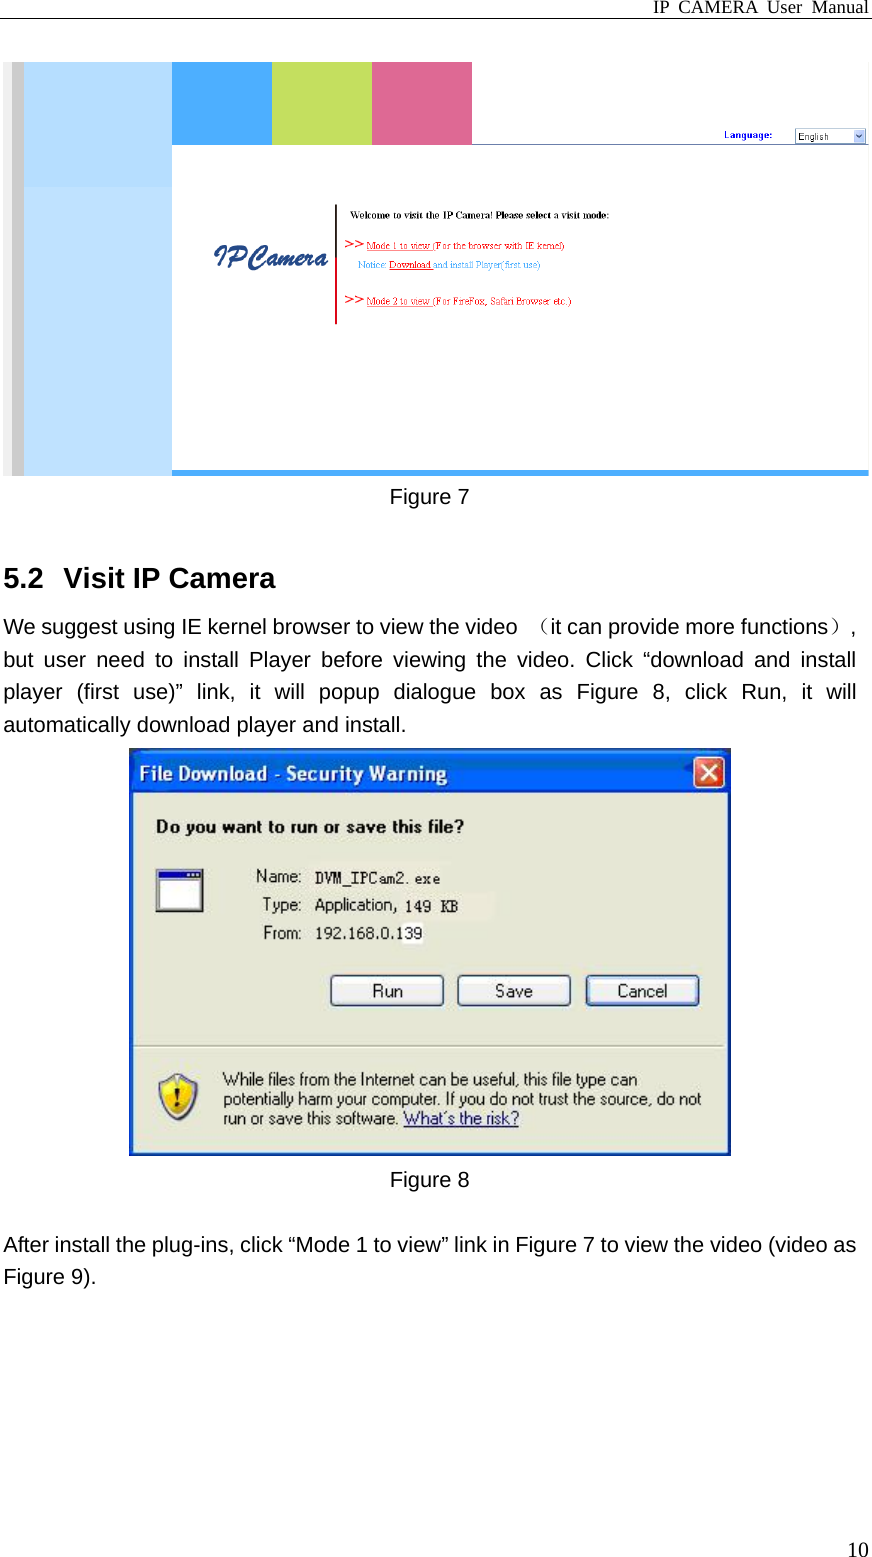 IP CAMERA User Manual  10 Figure 7  5.2  Visit IP Camera We suggest using IE kernel browser to view the video  （it can provide more functions）, but user need to install Player before viewing the video. Click “download and install player (first use)” link, it will popup dialogue box as Figure 8, click Run, it will automatically download player and install.  Figure 8  After install the plug-ins, click “Mode 1 to view” link in Figure 7 to view the video (video as Figure 9). 